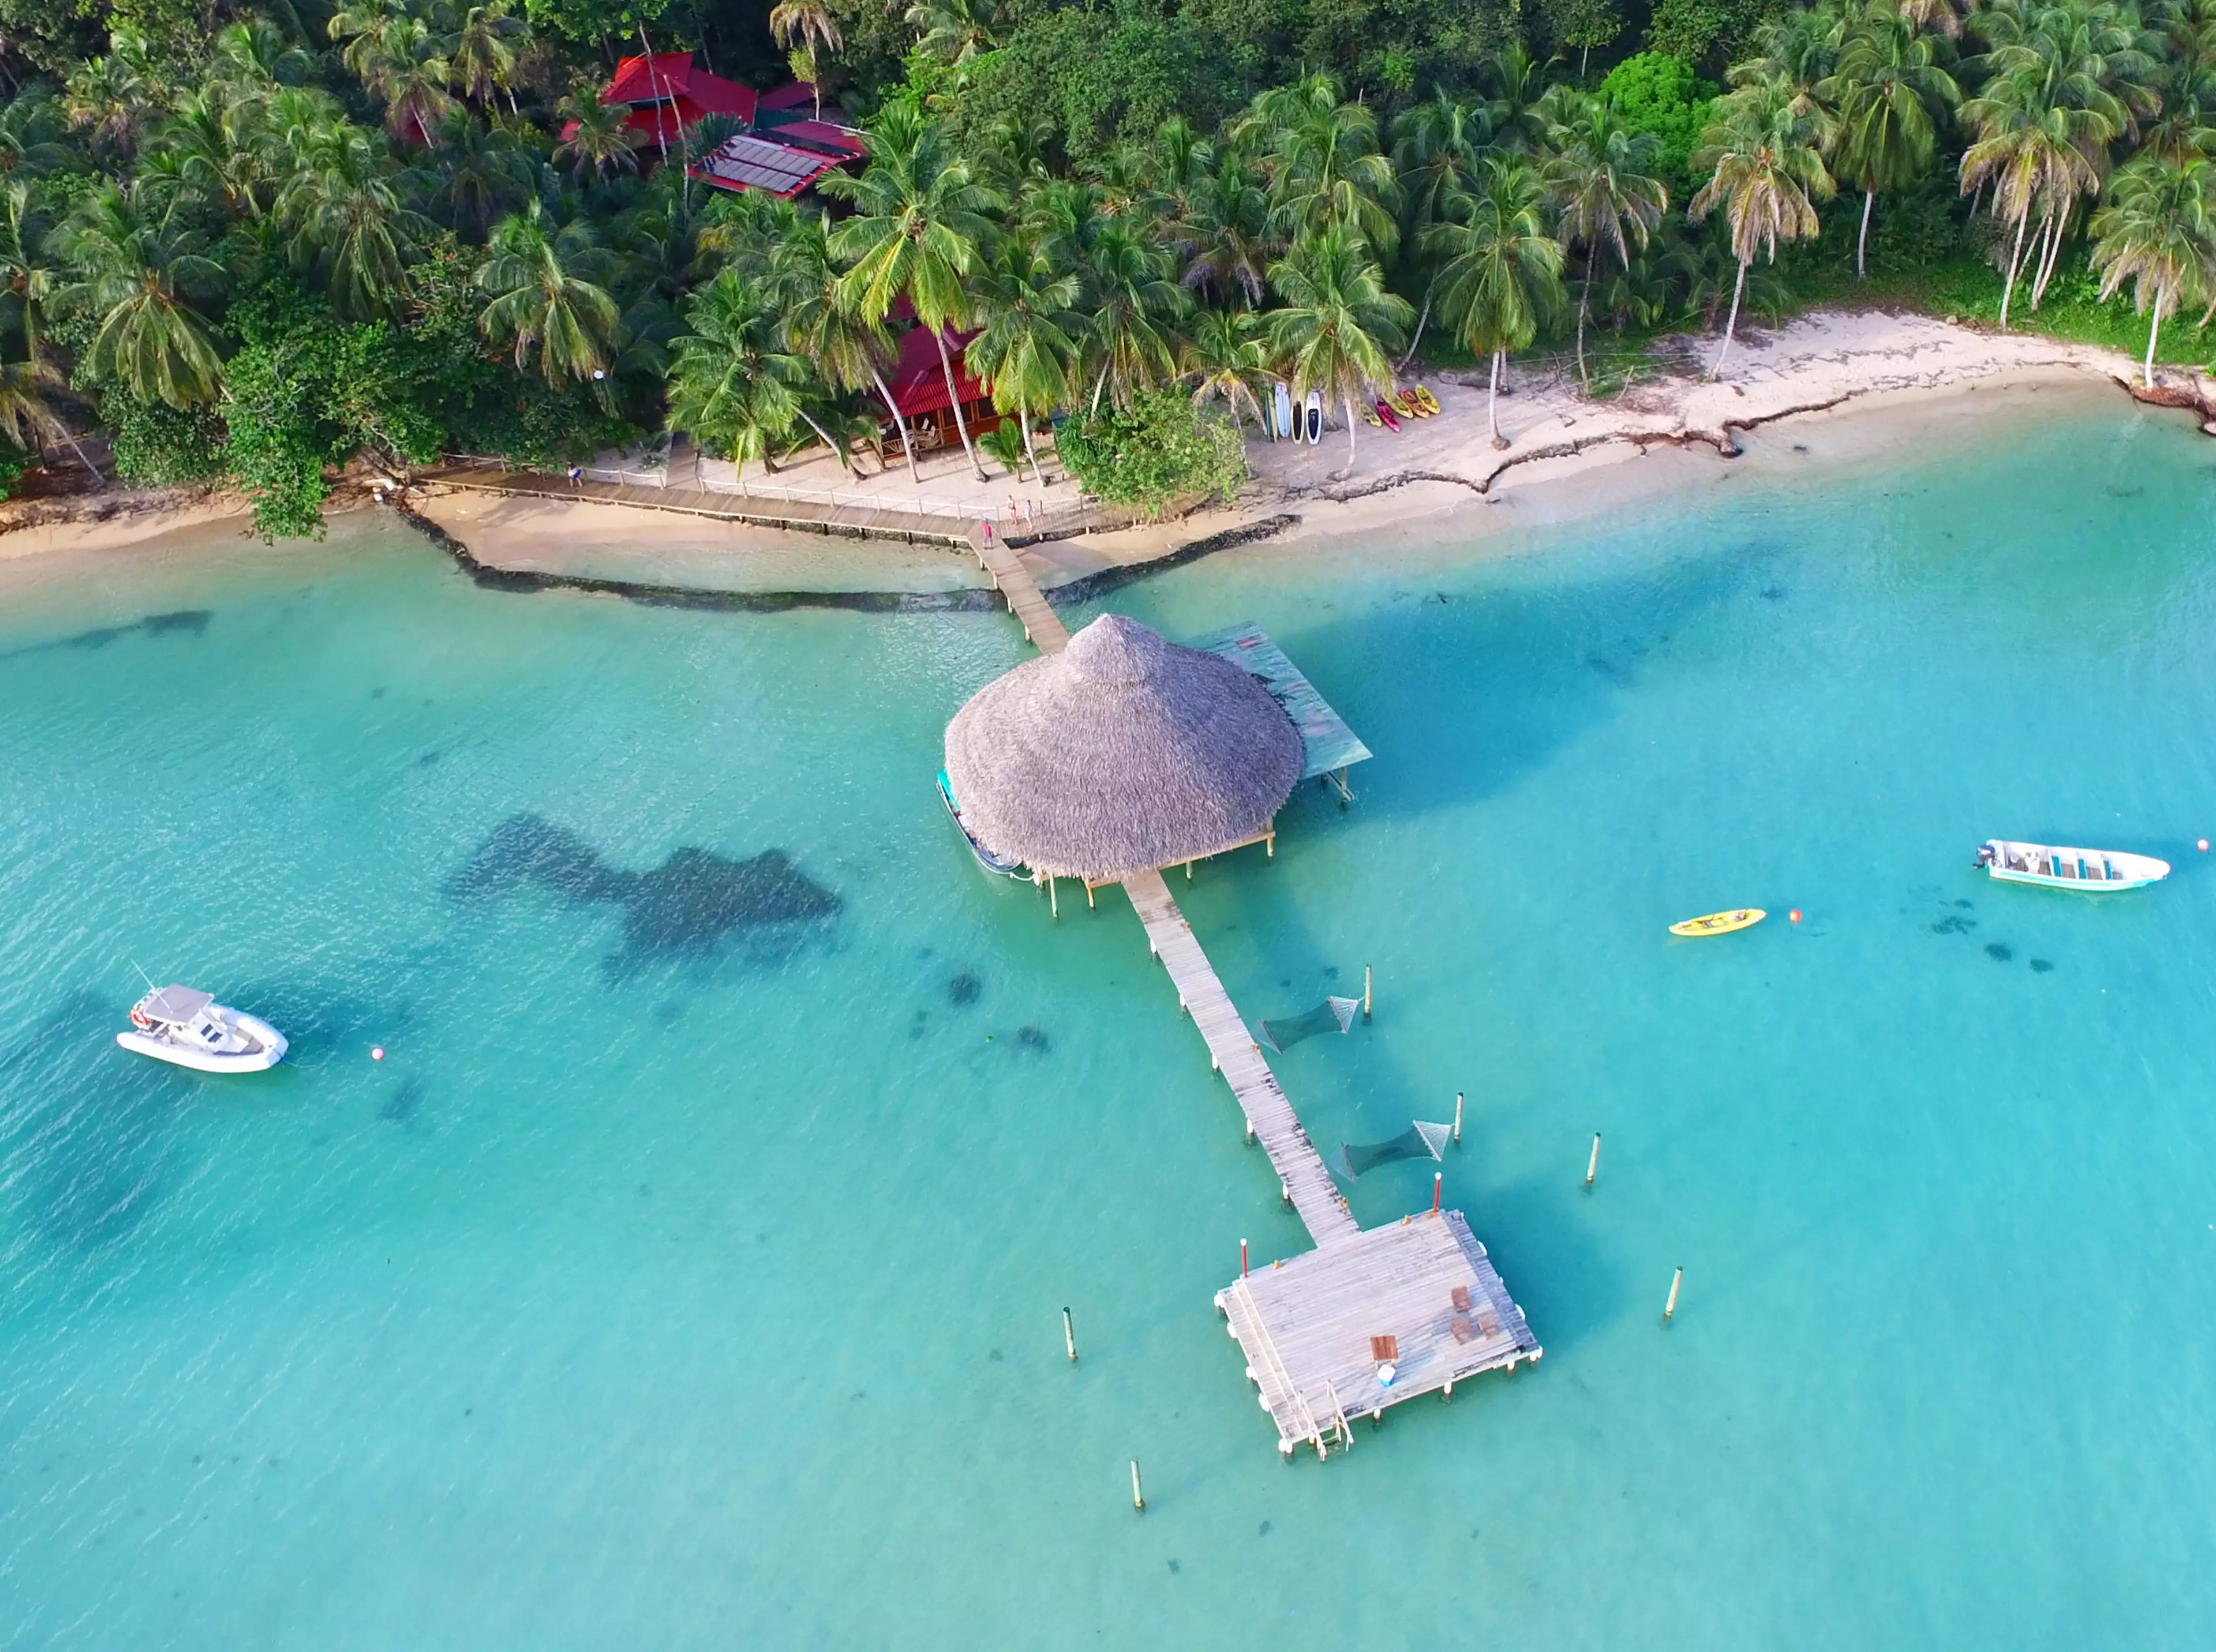 $10 Could Net You This Sweet, Multi-Million Dollar Eco Resort